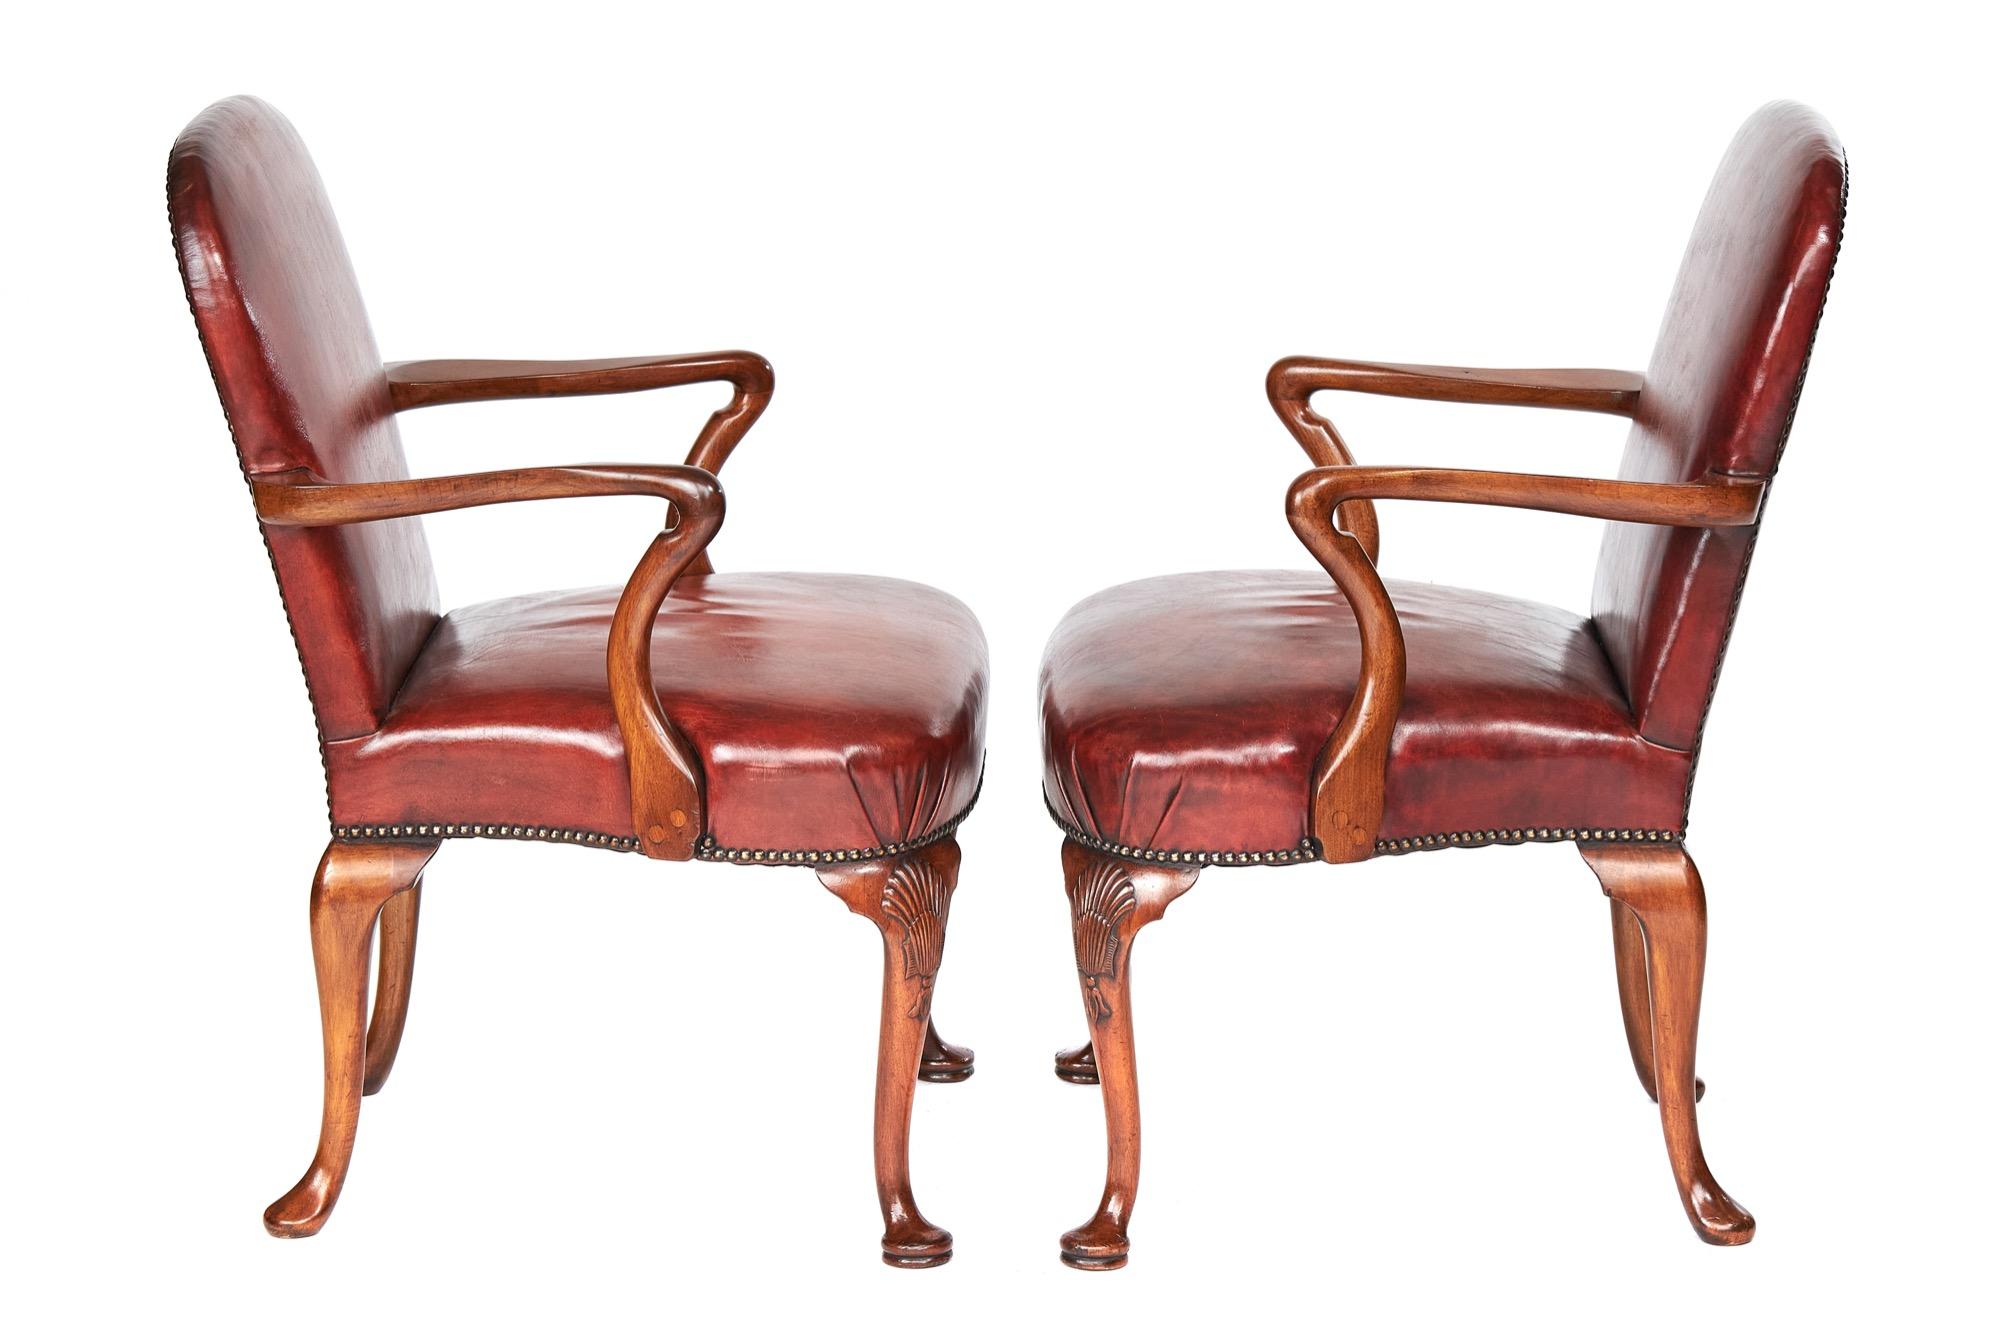 English Pair Georgian Revival Walnut & Leather Open Elbow Chairs, circa 1920s For Sale